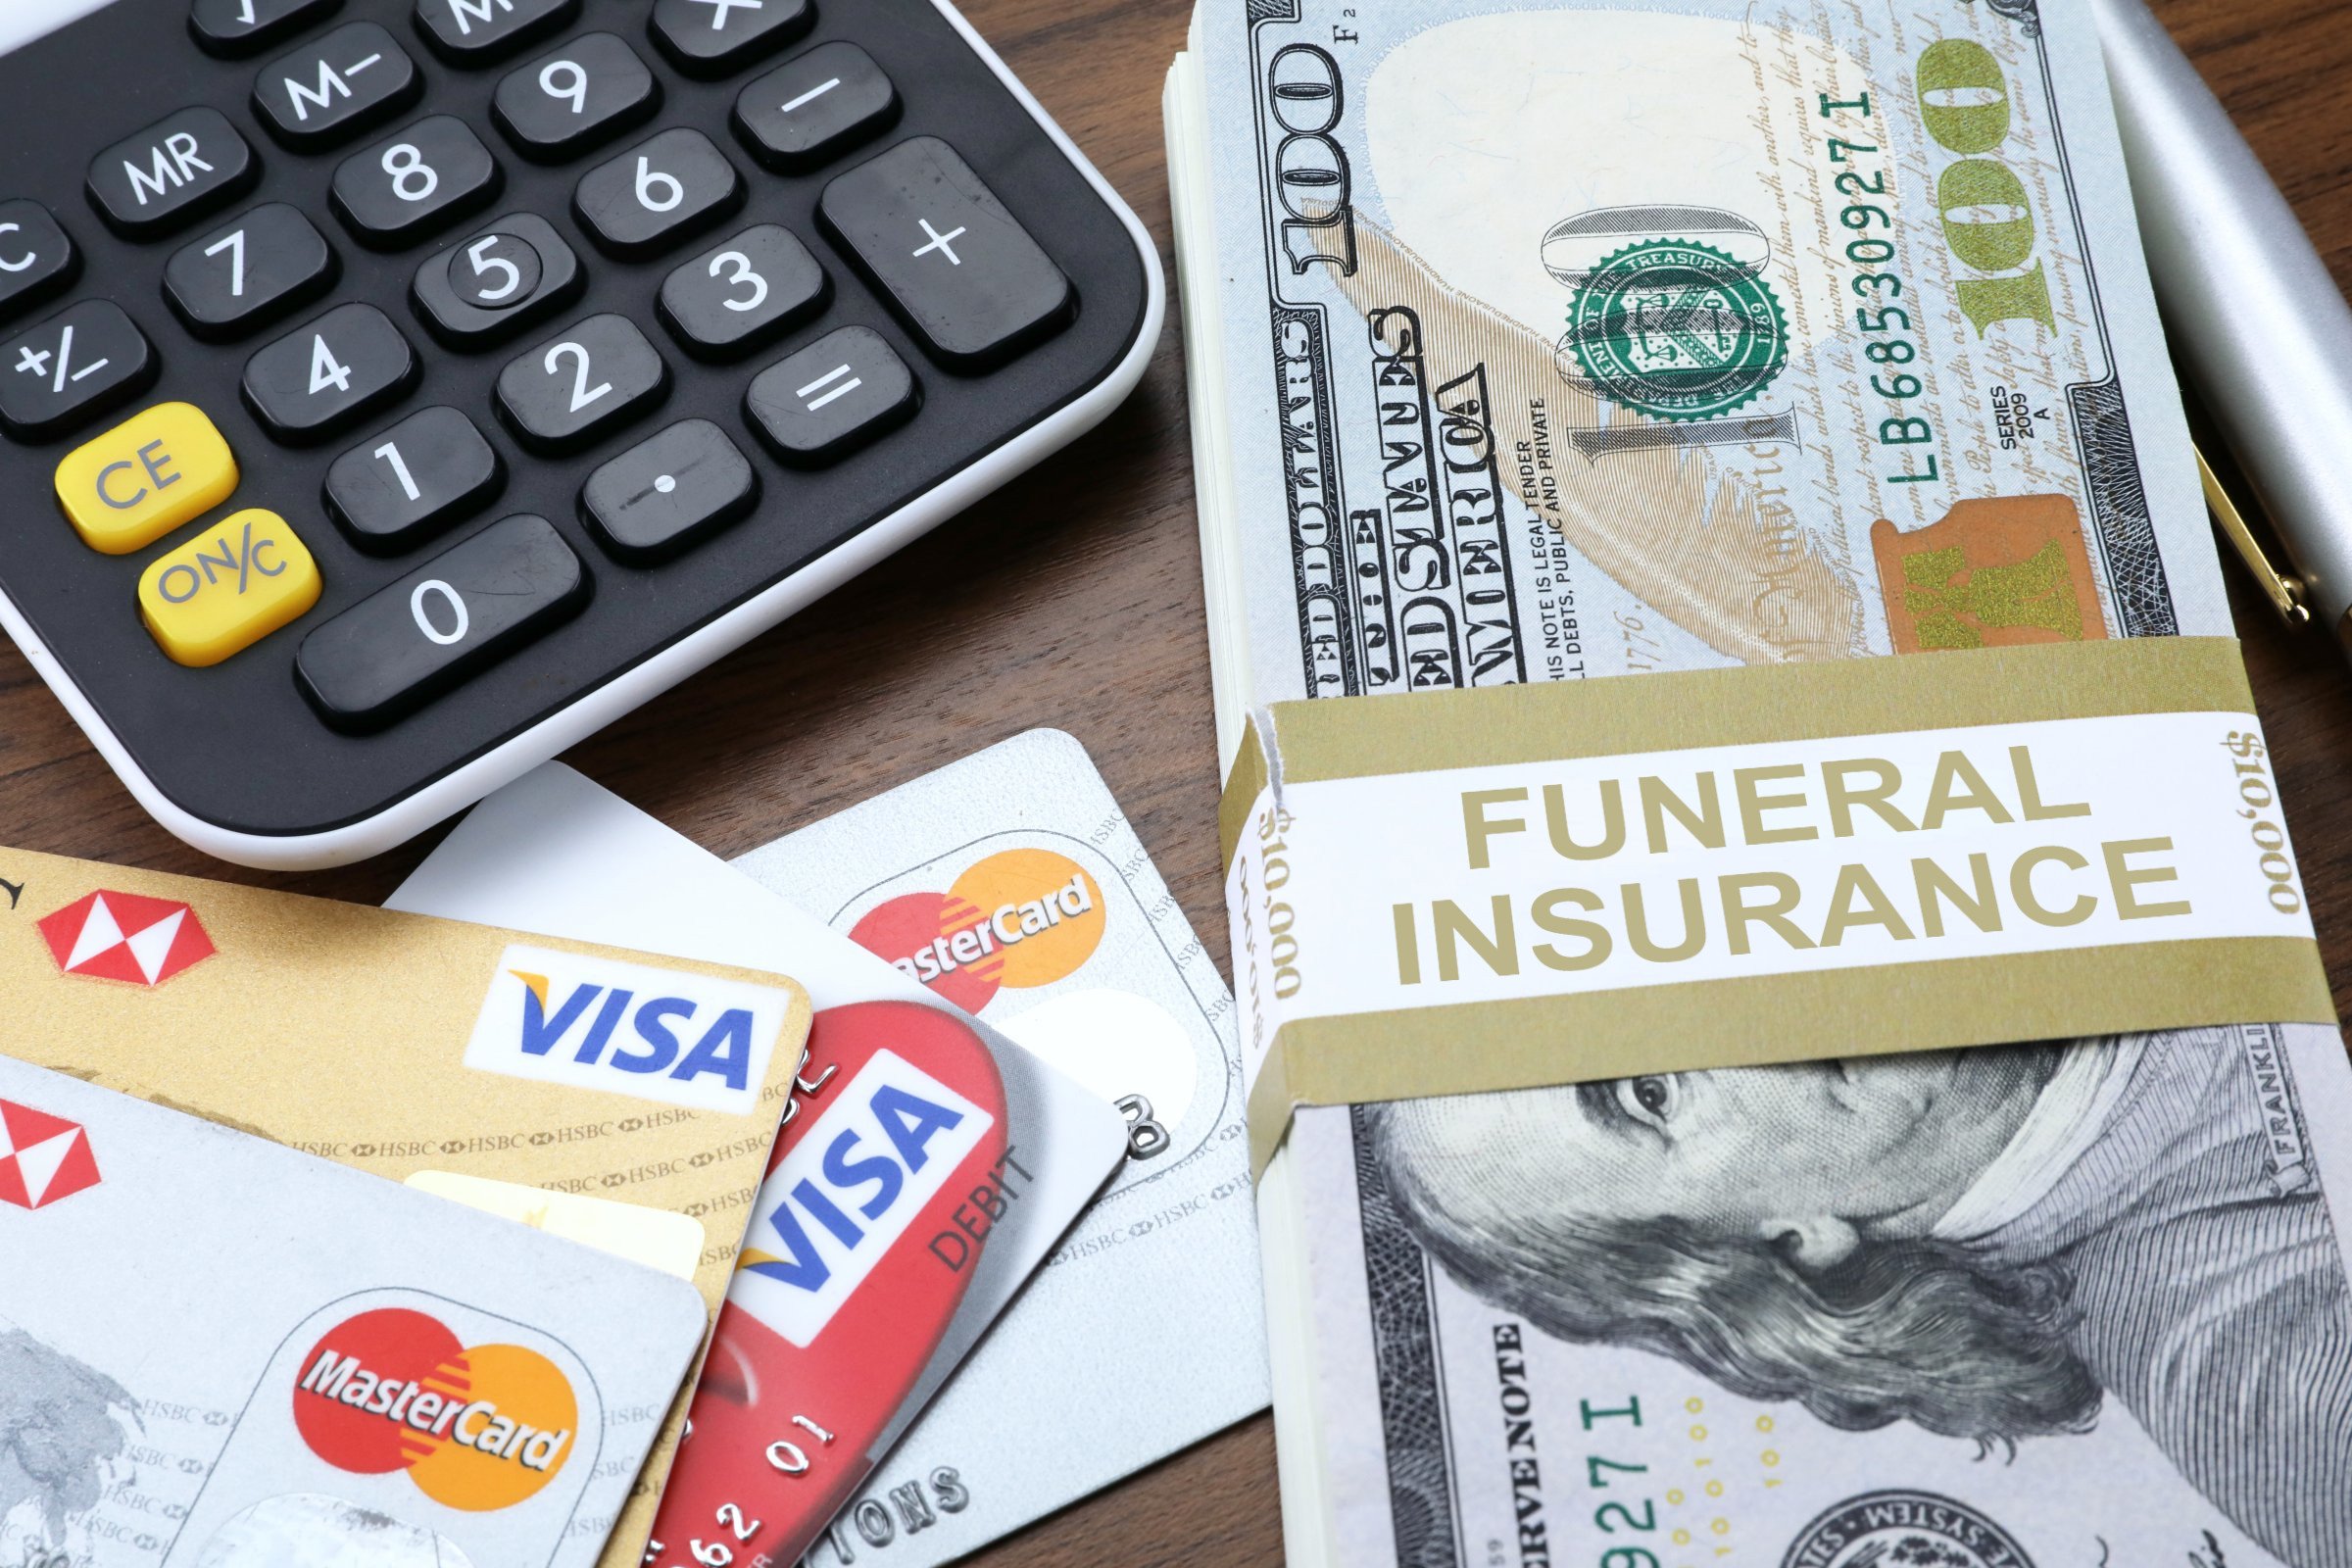 funeral insurance